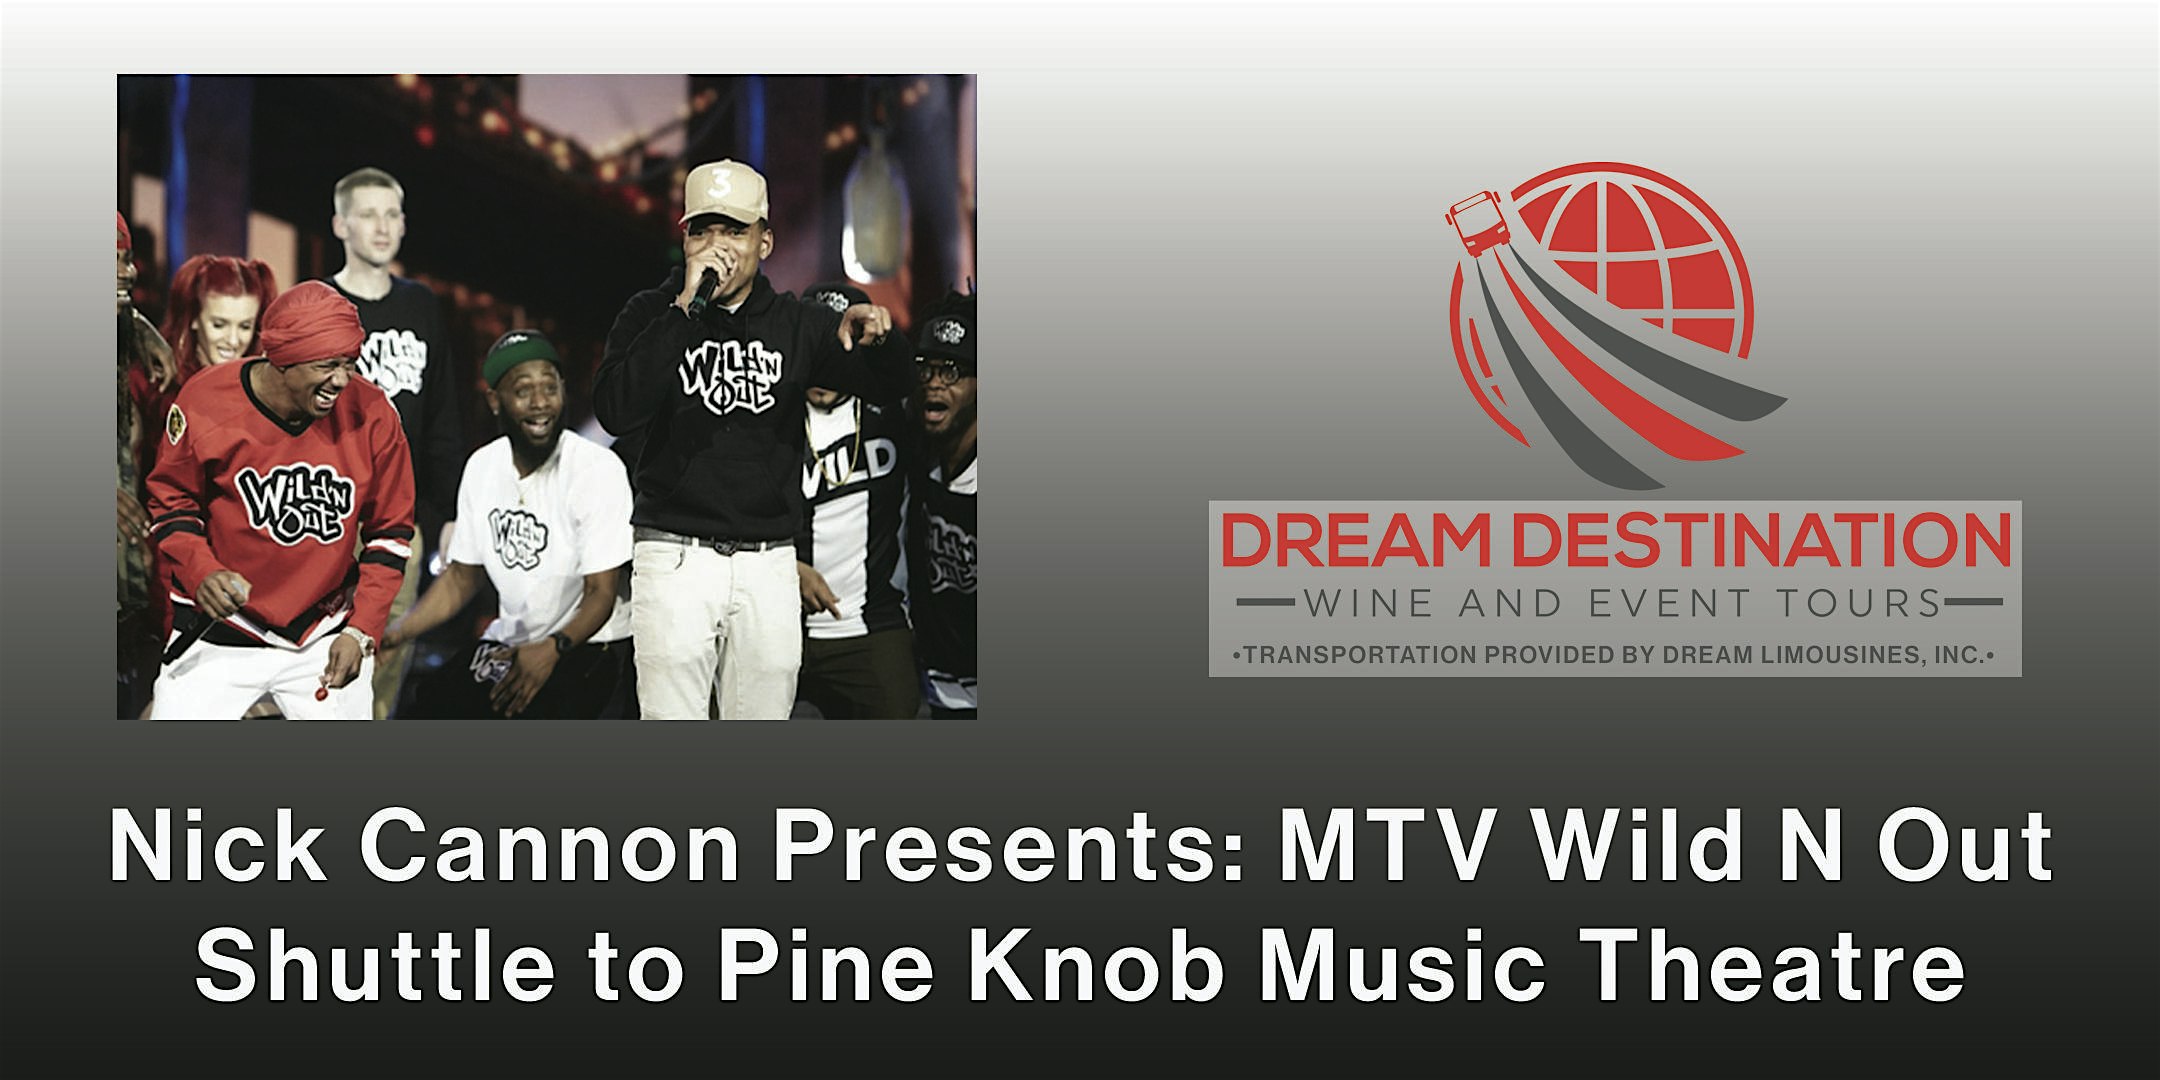 Shuttle Bus to See Nick Cannon Presents: MTV Wild N Out at Pine Knob